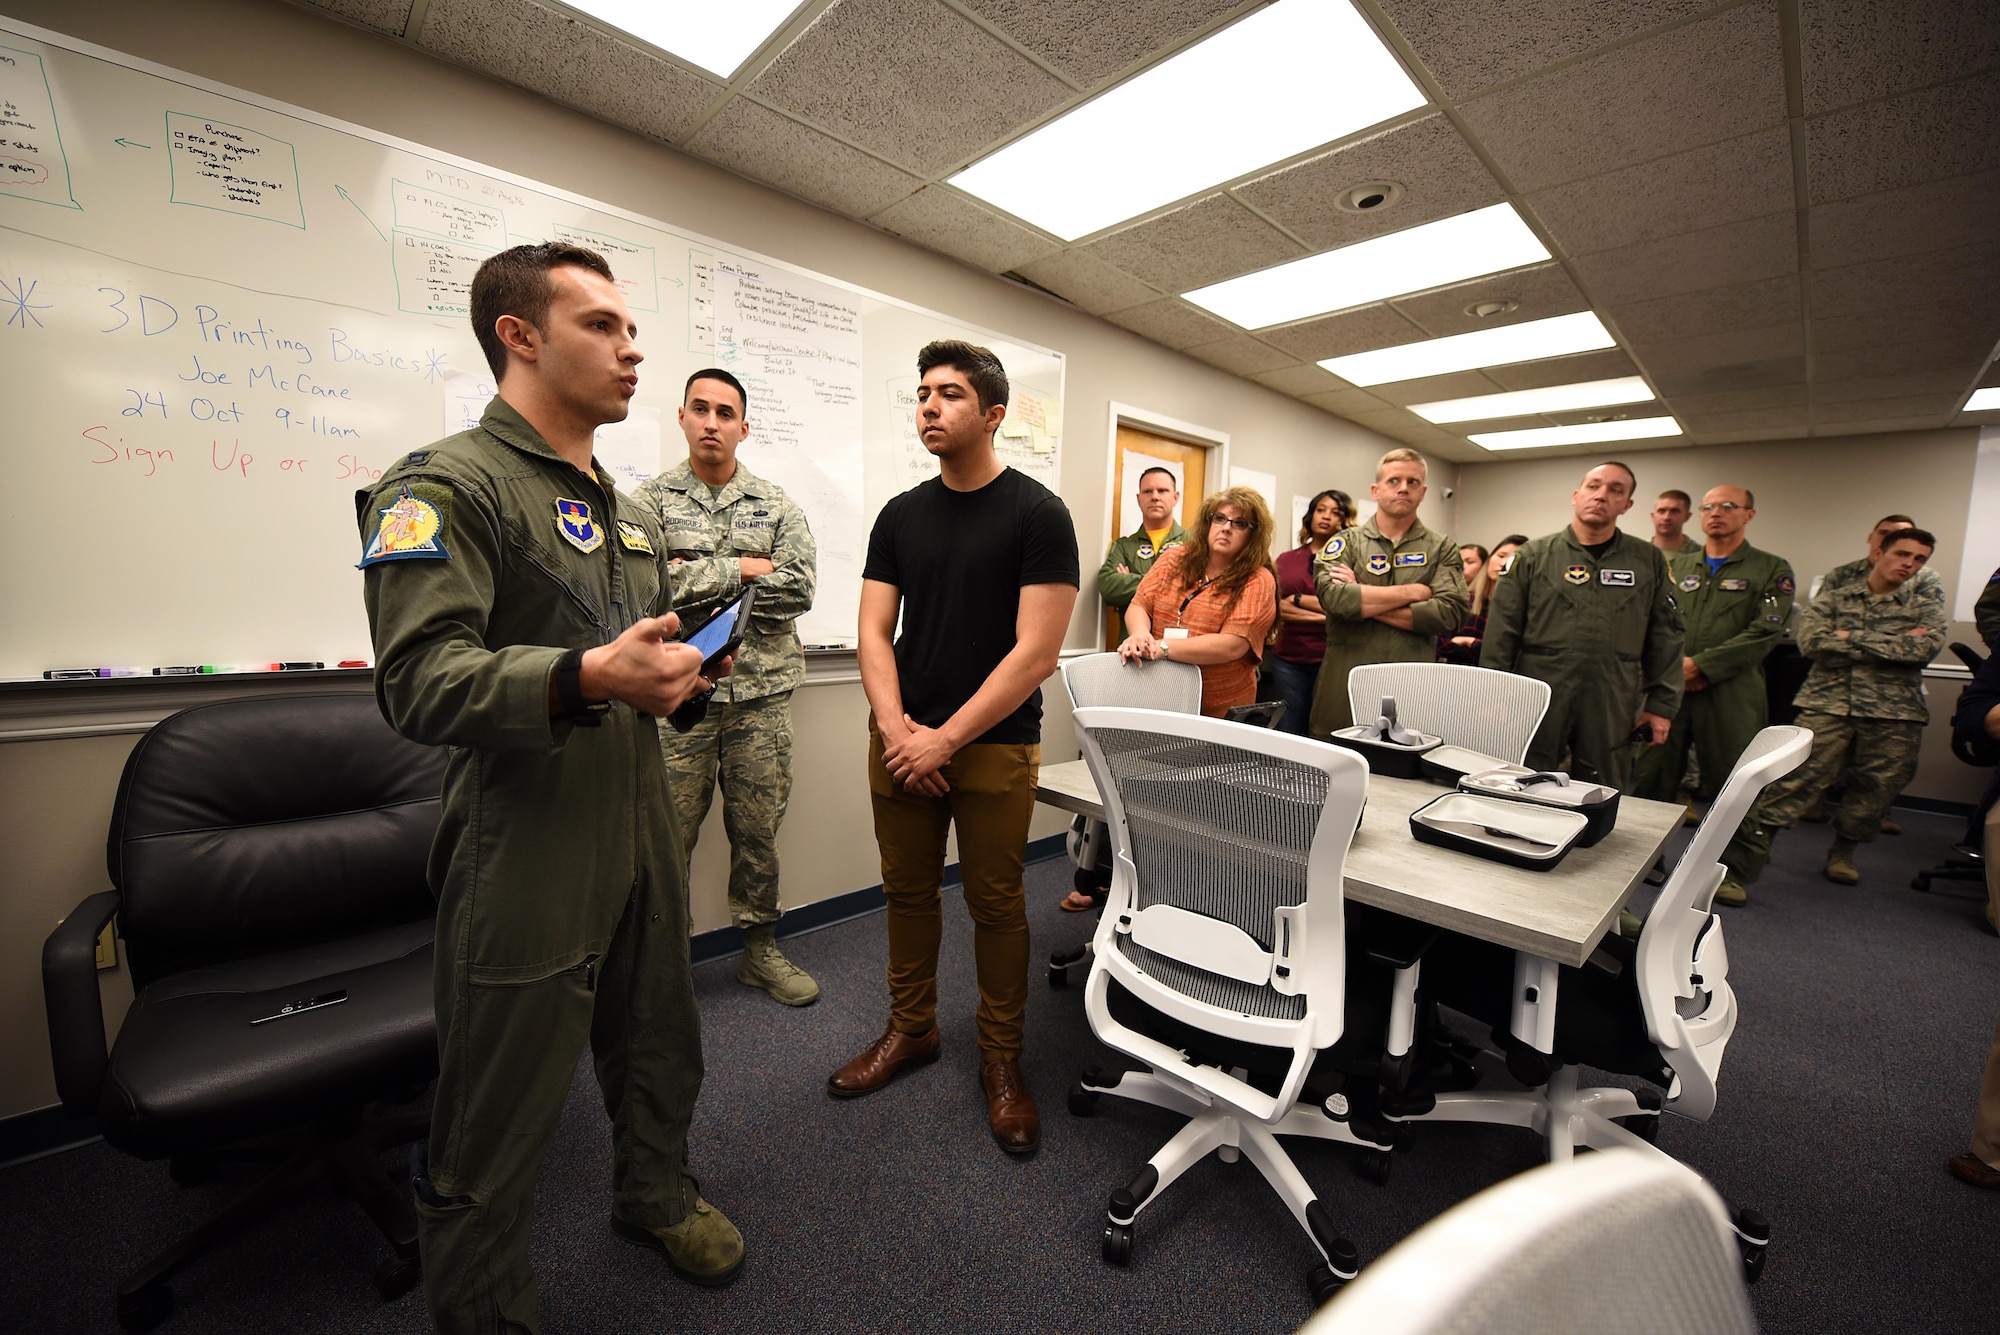 Capt. Phillip Huebner, 37th Flying Training Squadron instructor pilot, speaks during the Spark Cell grand opening Oct. 19, 2018, on Columbus Air Force Base, Mississippi. The innovation team is requiring all individuals interested in 3D printing to get signed off by a Spark Cell member first to help protect the equipment. (U.S. Air Force photo by Airman 1st Class Keith Holcomb)